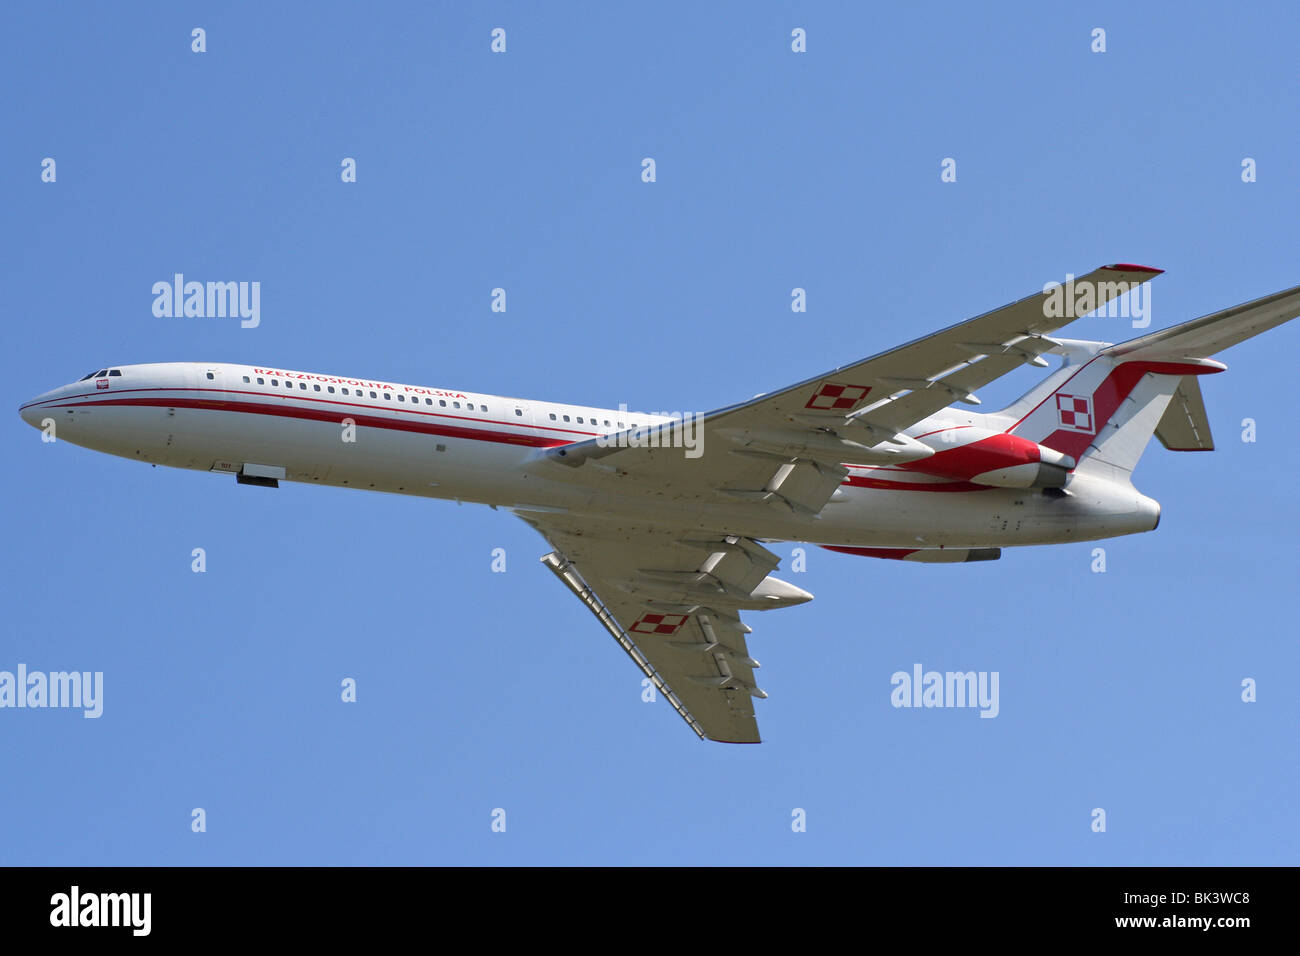 Polish Air Force Tupolev 154 (reg. 101) which crashed in Smolensk Russia  with President Lech Kaczynski Stock Photo - Alamy